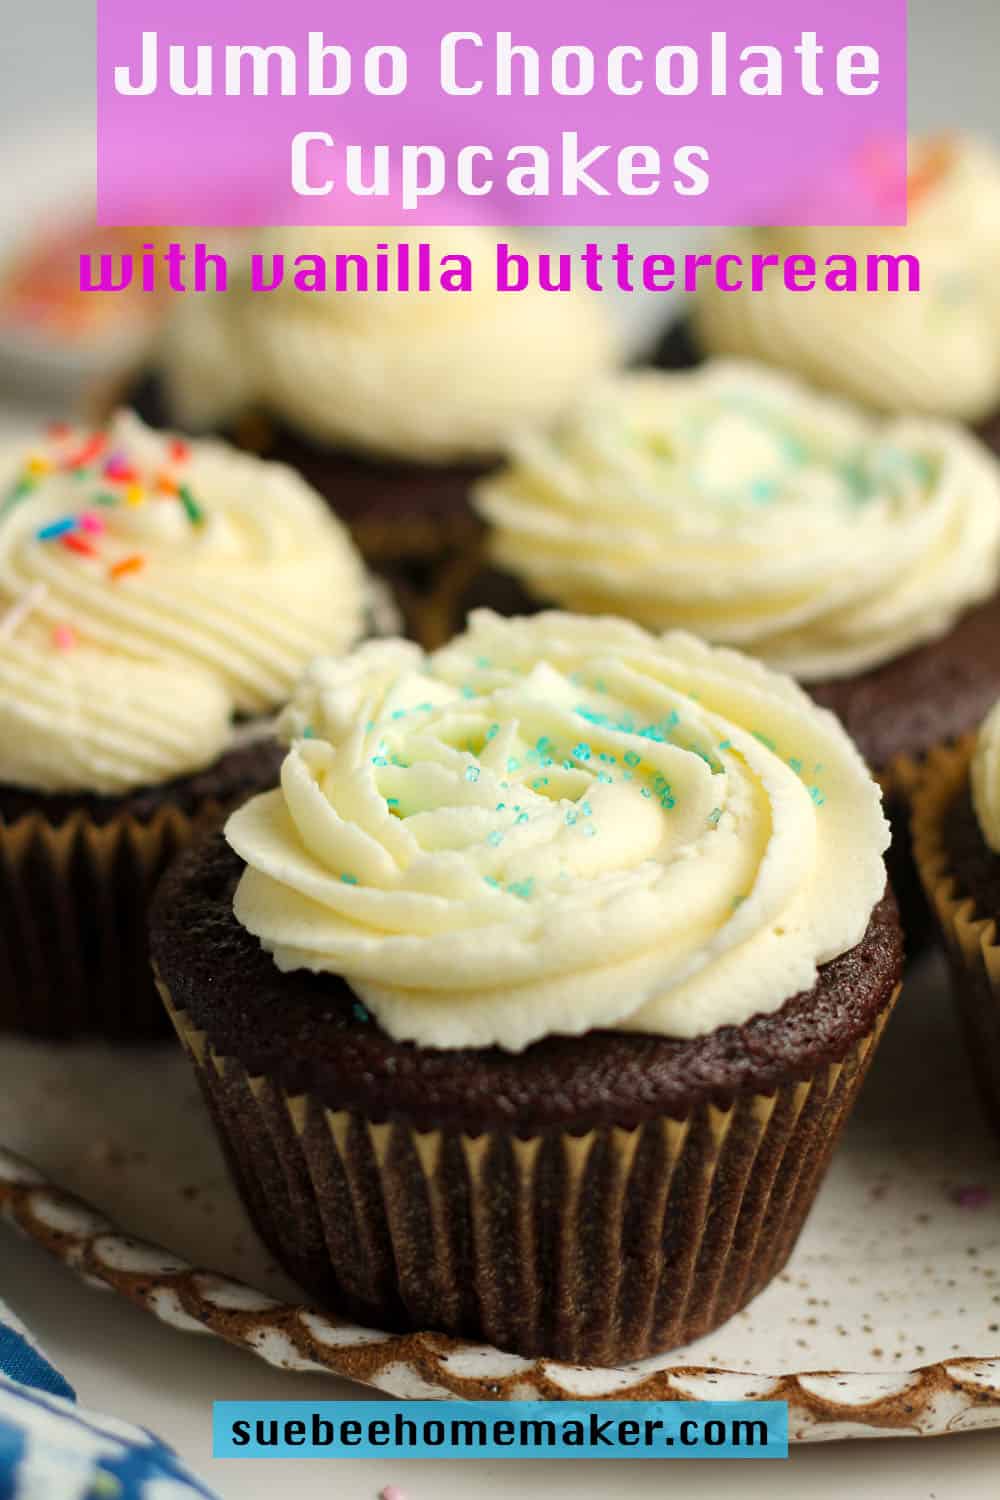 A plate of jumbo chocolate cupcakes with vanilla buttercream.